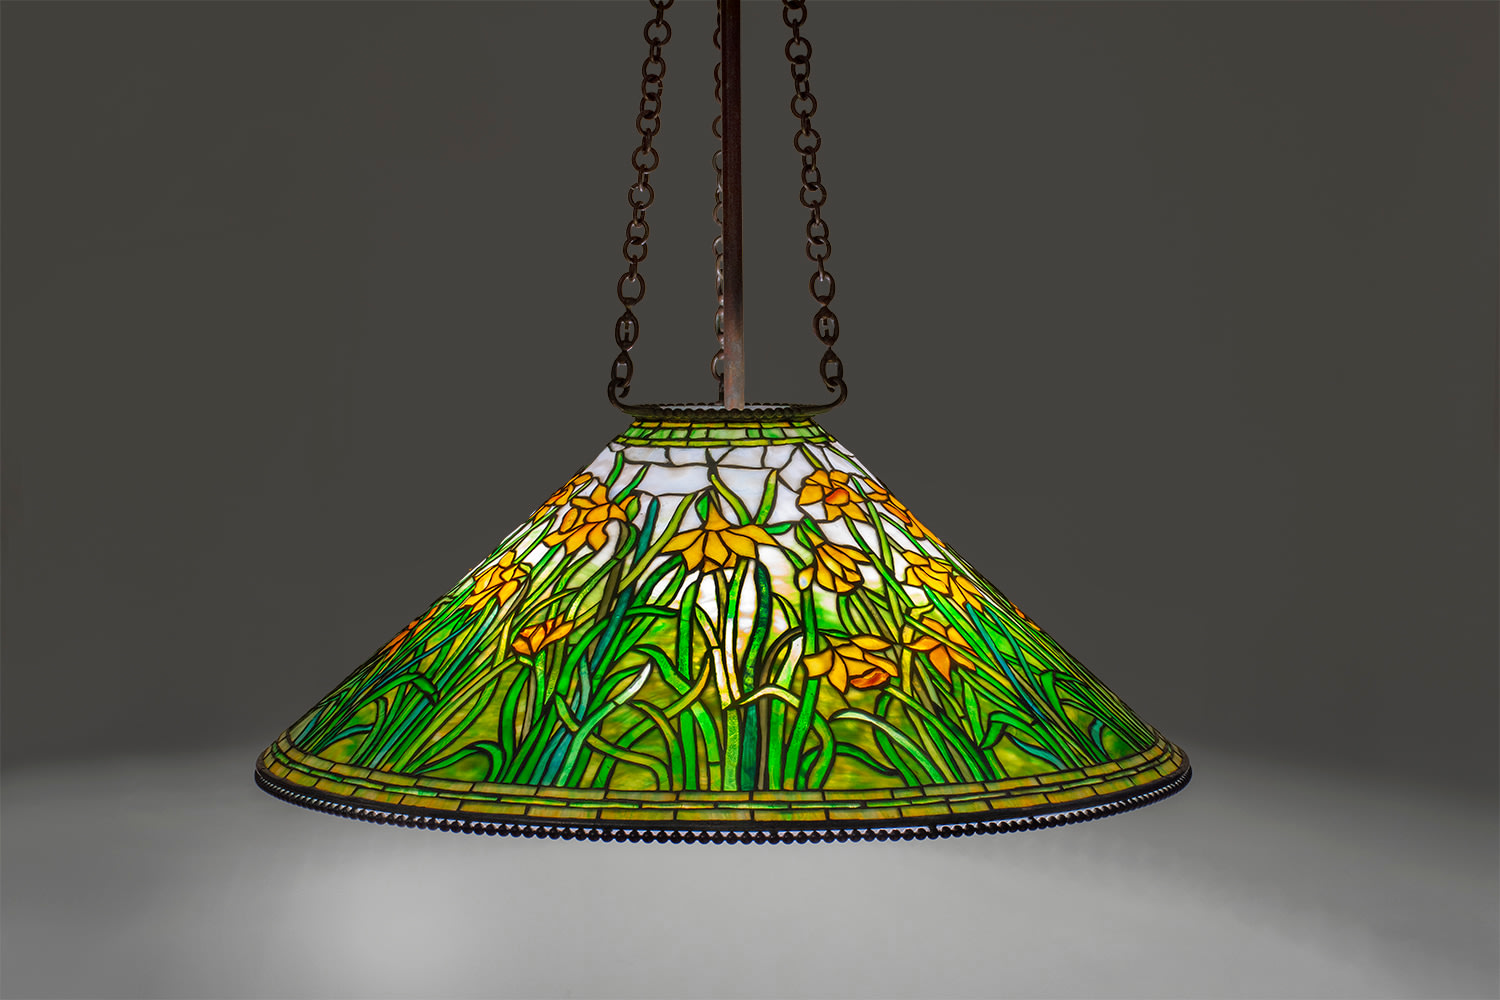 a cone shaped hanging tiffany lamp with beaded upper and lower rims, hanging from three chains, depicting in leaded glass a series of stylized yellow daffodils in mottled yellow glass, the lower edge of the shade filled with the daffodil's green spiky stems and leaves, the upper portion of the sky a milky opalescent white glass